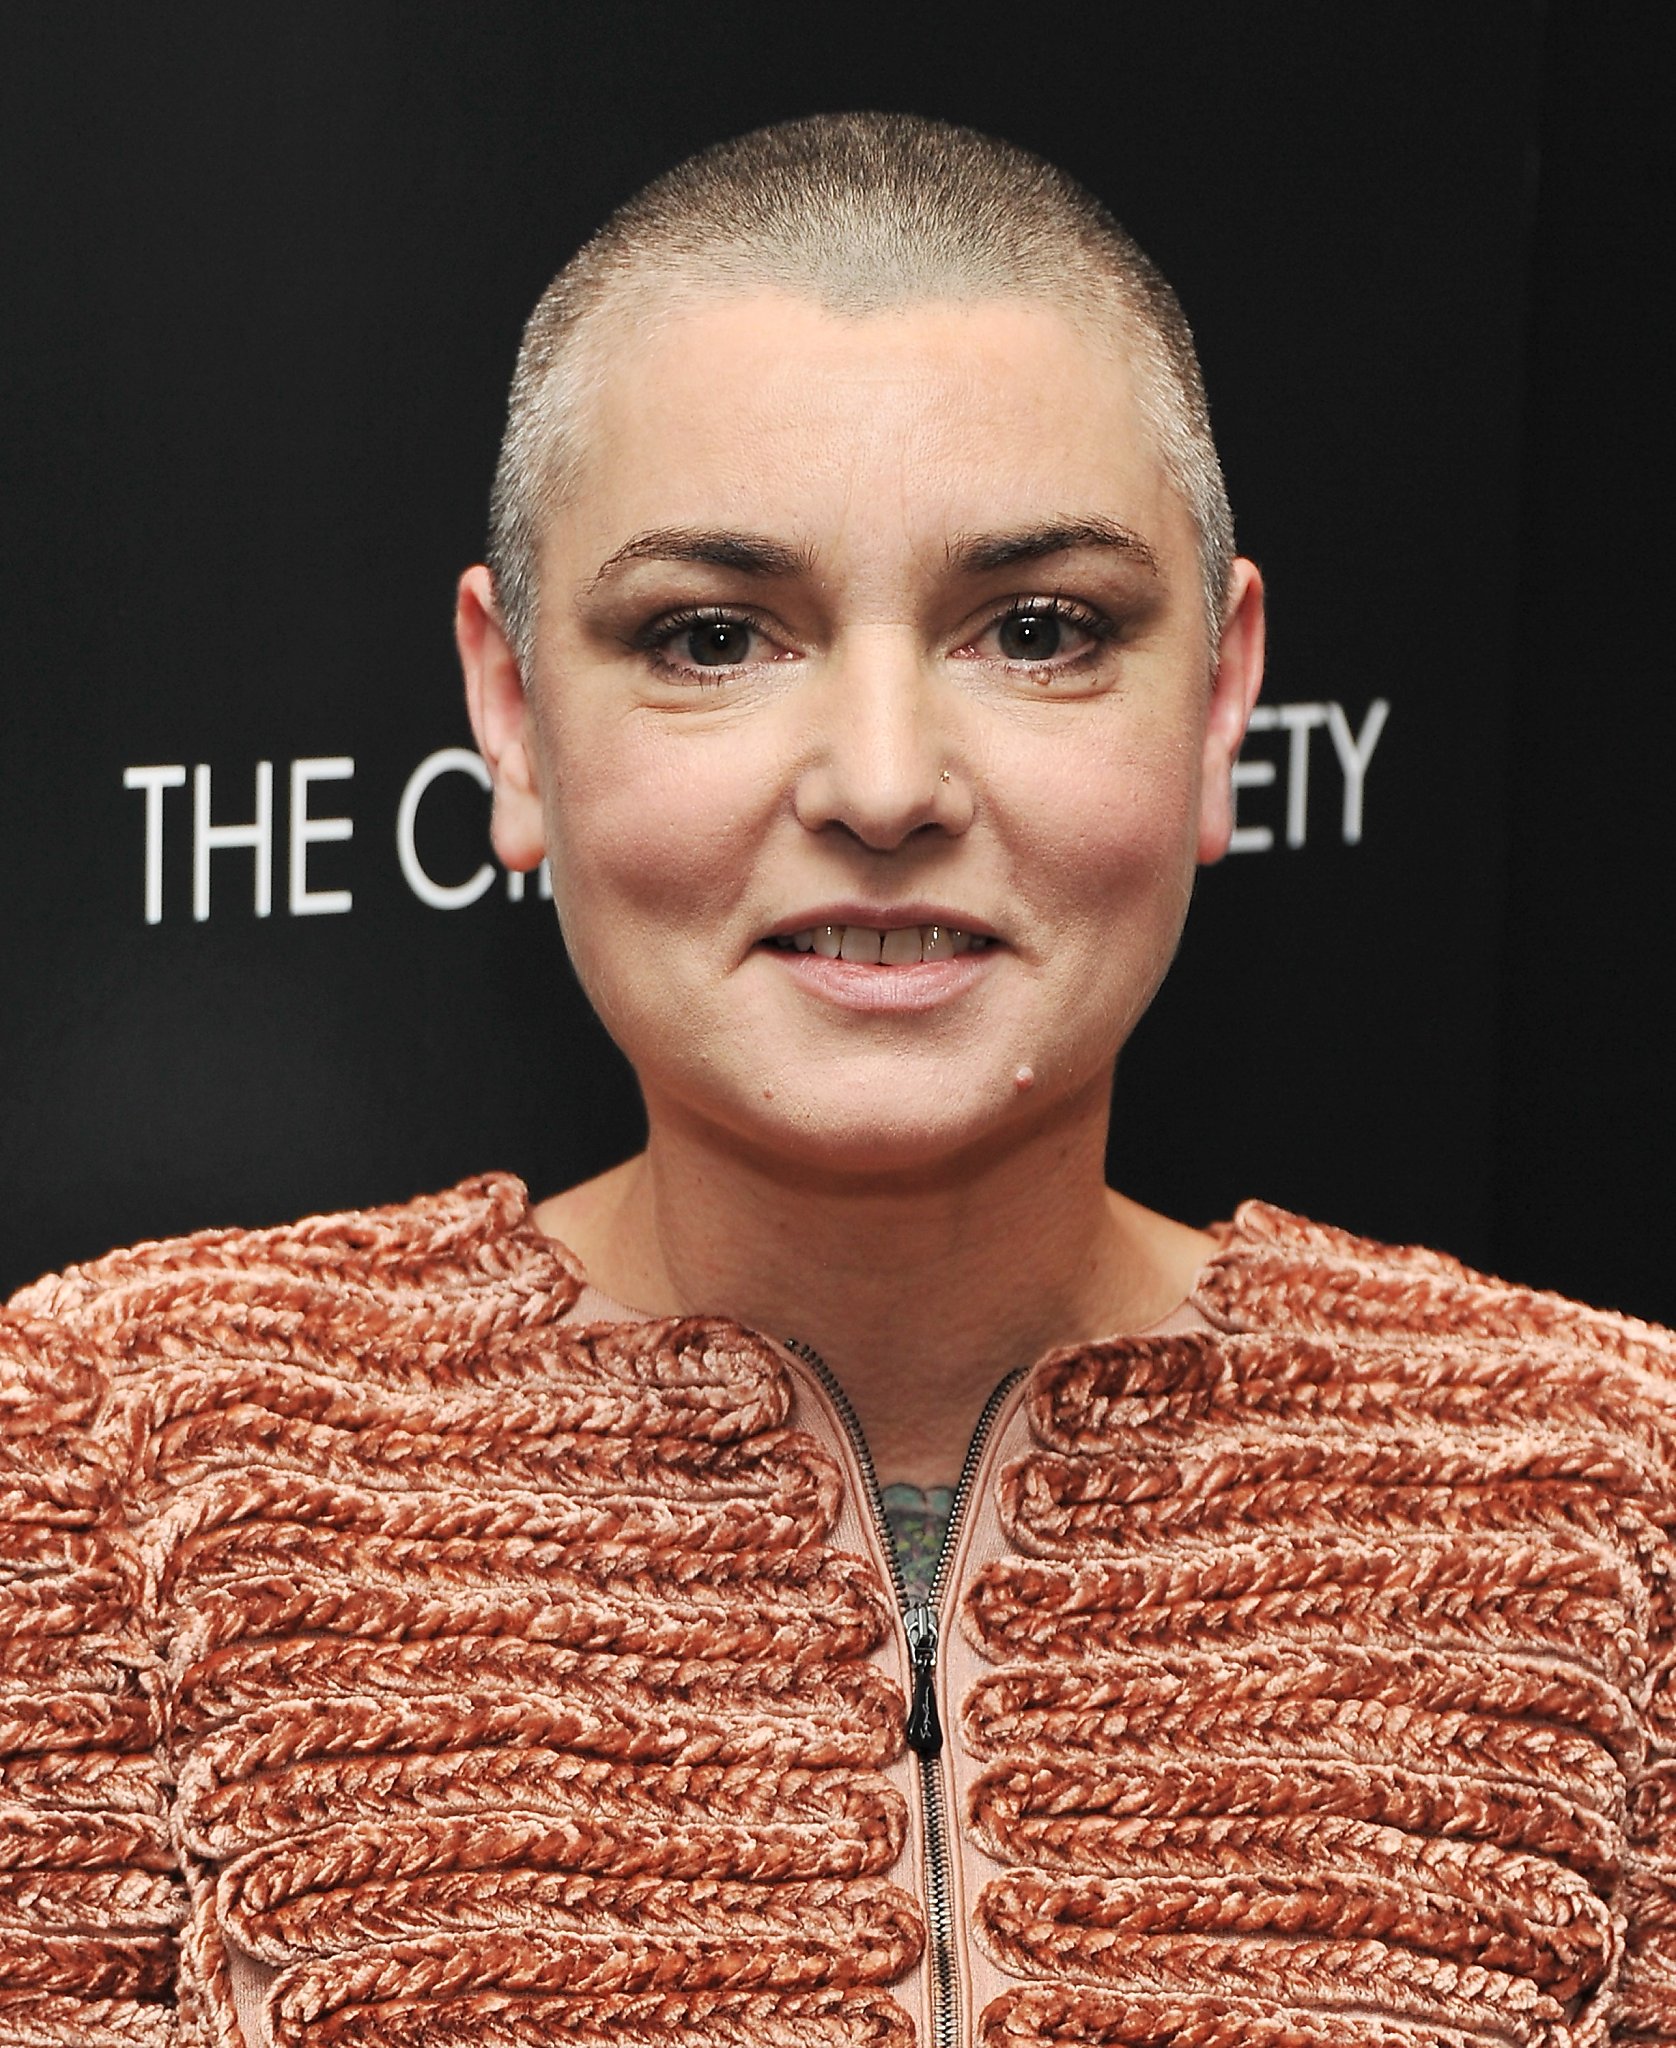 Album review: Sinéad O'Connor, 'I'm Not I'm the Boss'